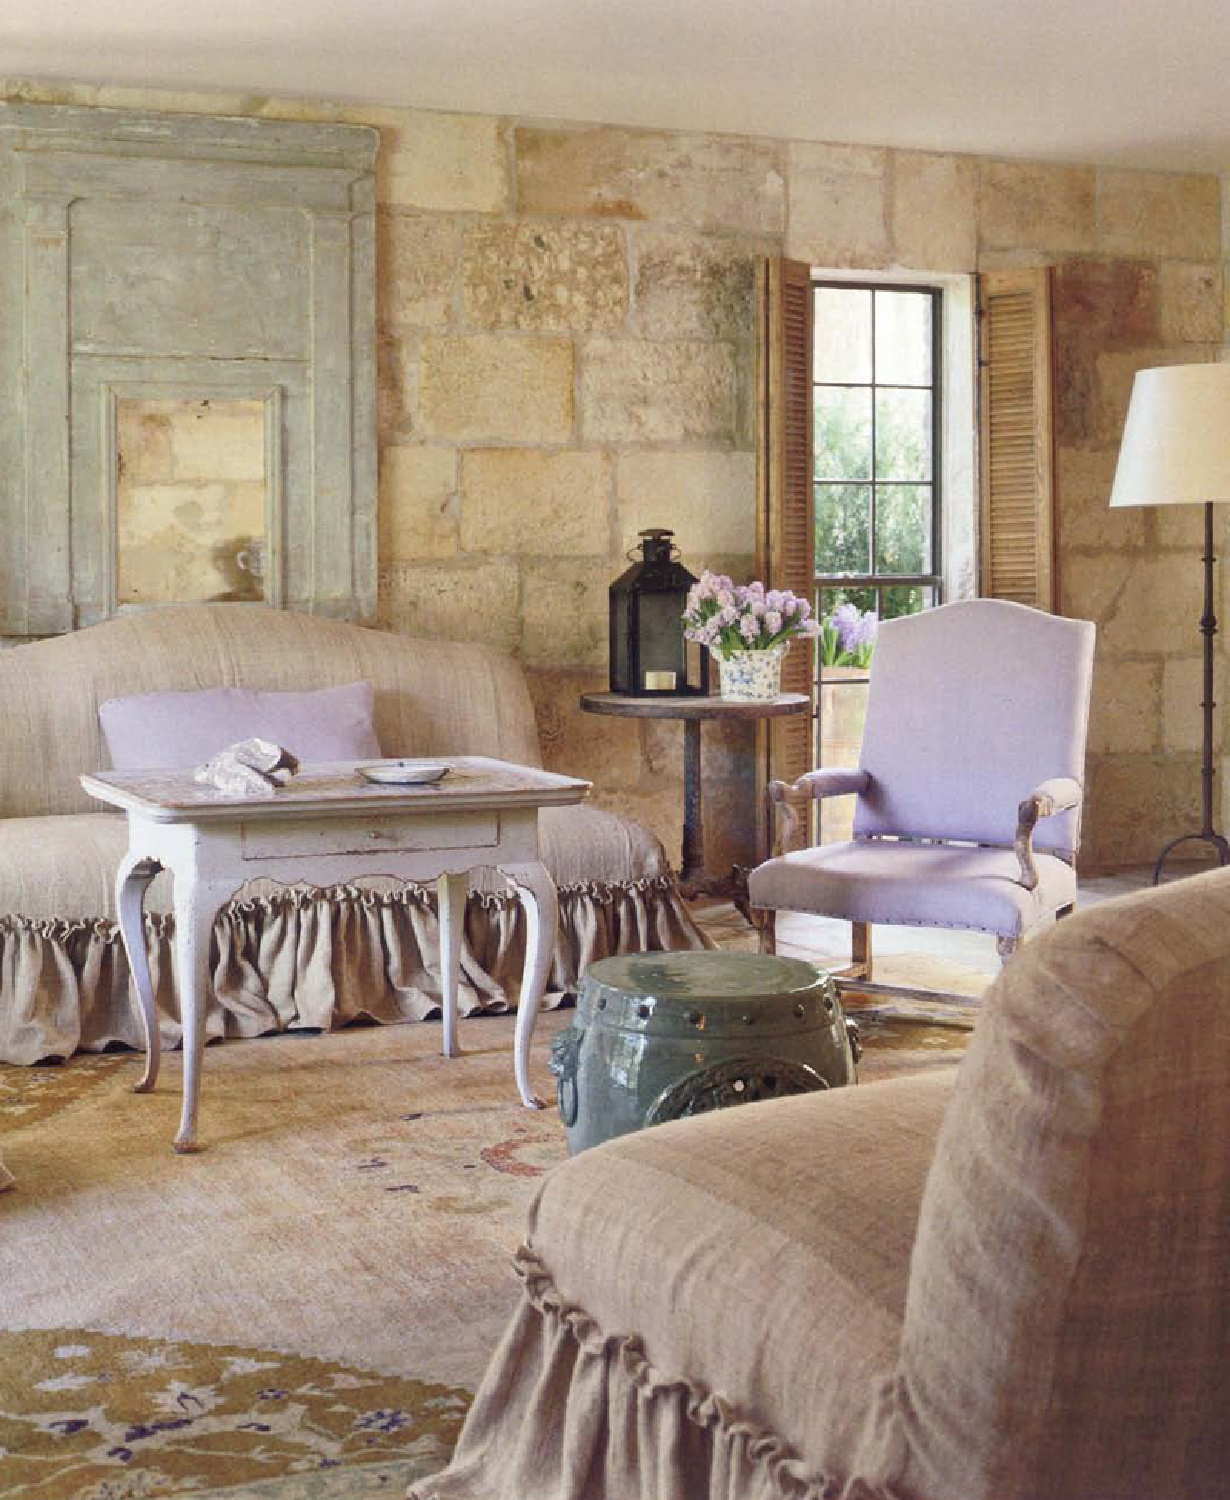 Chateau Domingue's Ruth Gay's exquisite home with design by Pamela Pierce, antiques, and construction with reclaimed stone and materials from Europe. Come score ideas for a Timeless and Tranquil European Country Inspired Look. #europeancountry #interiordesign #frenchcountry